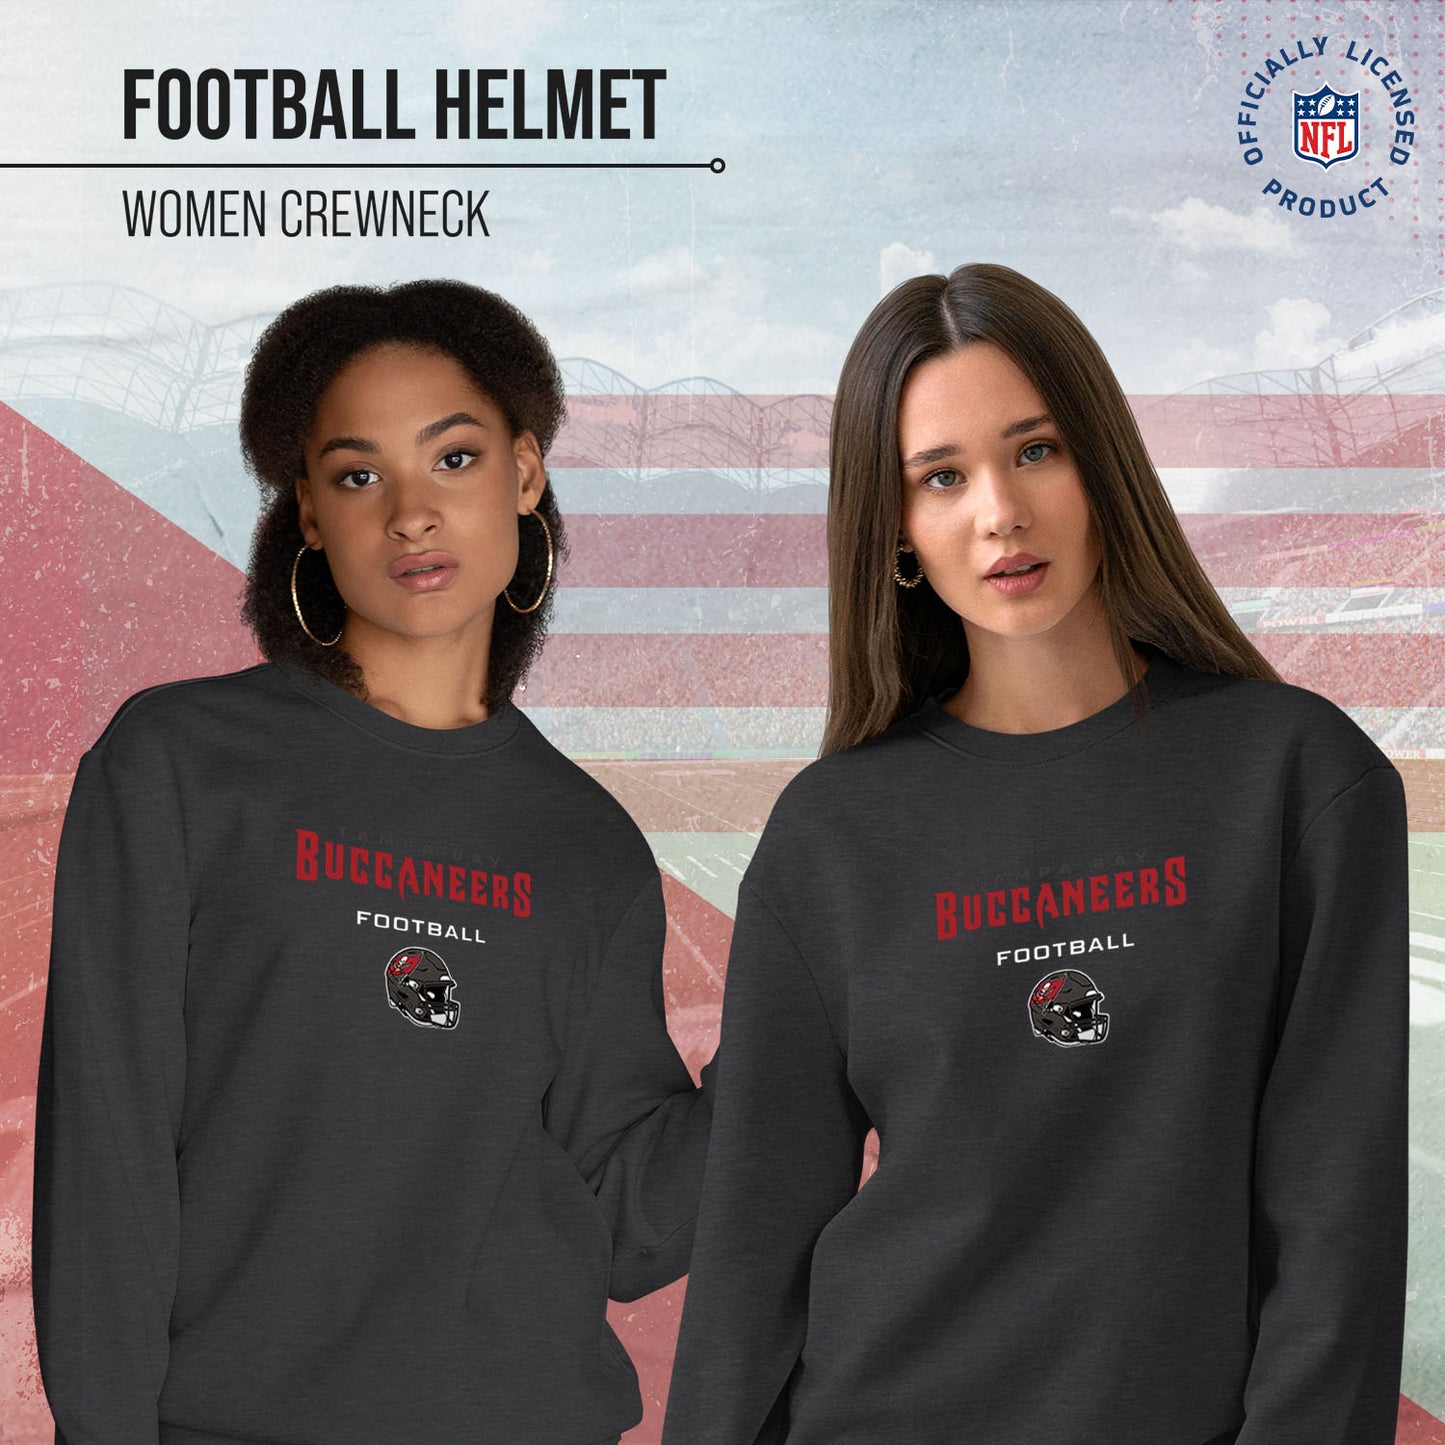 Tampa Bay Buccaneers Women's NFL Football Helmet Charcoal Slouchy Crewneck -Tagless Lightweight Pullover - Charcoal